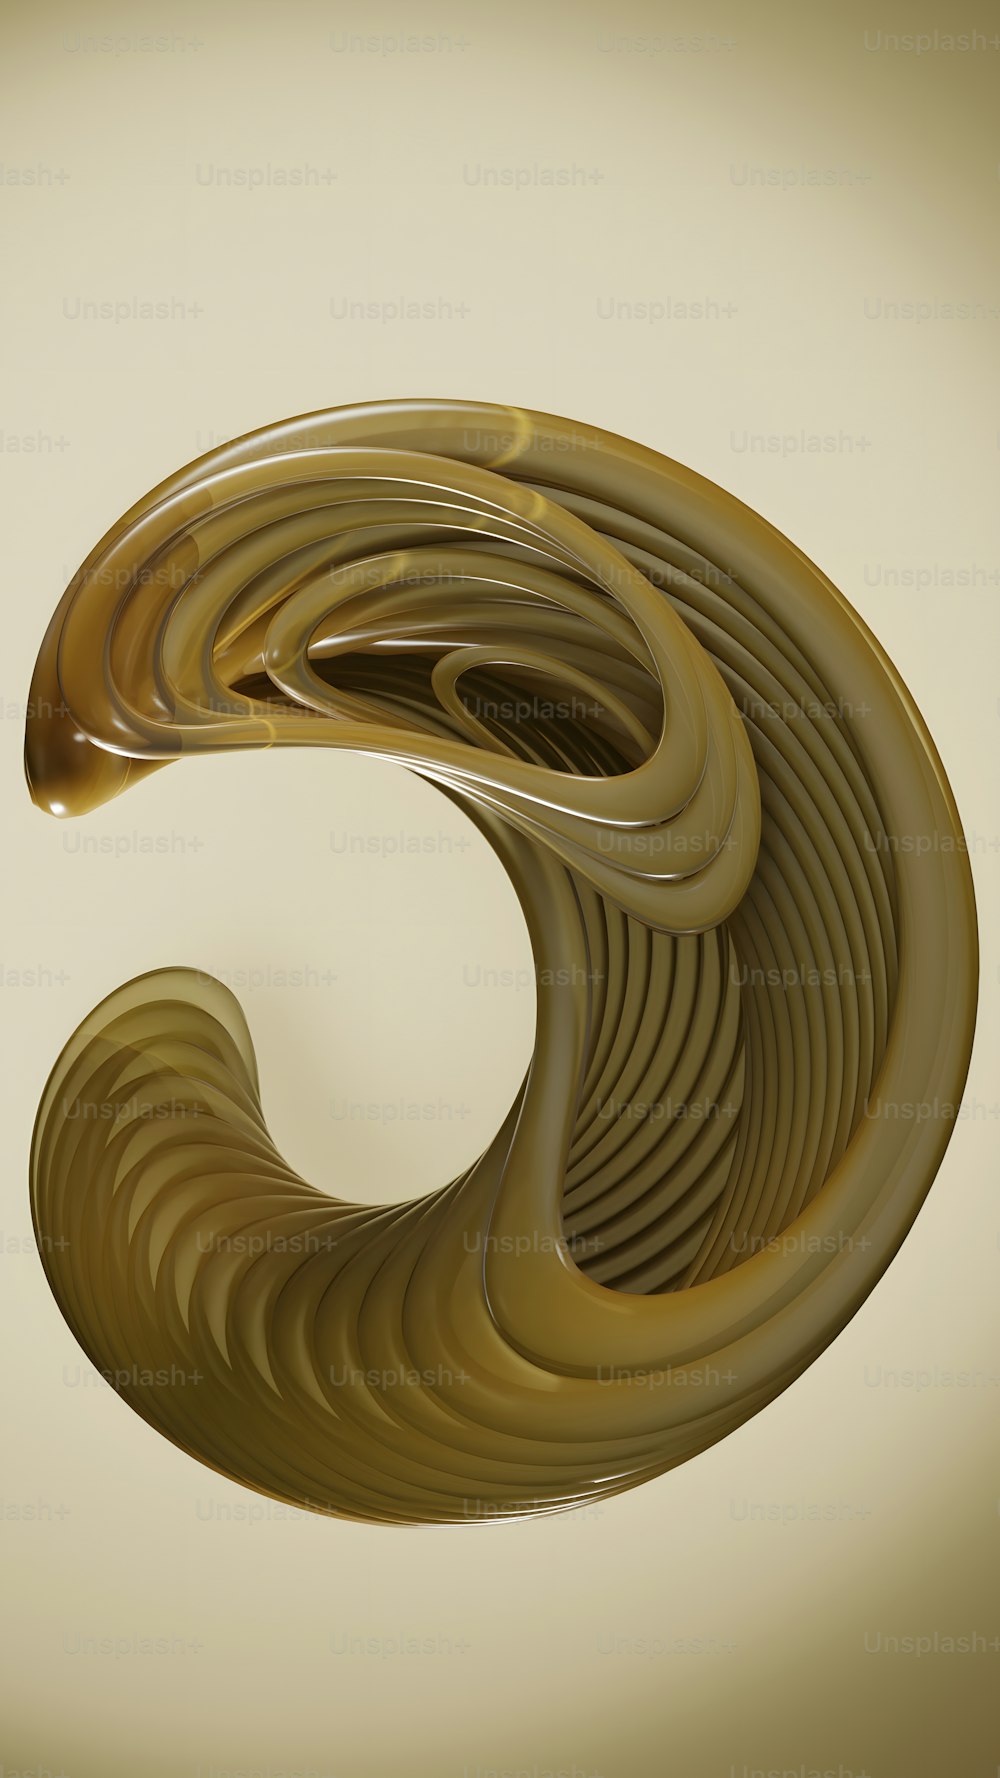 a computer generated image of a spiral like object